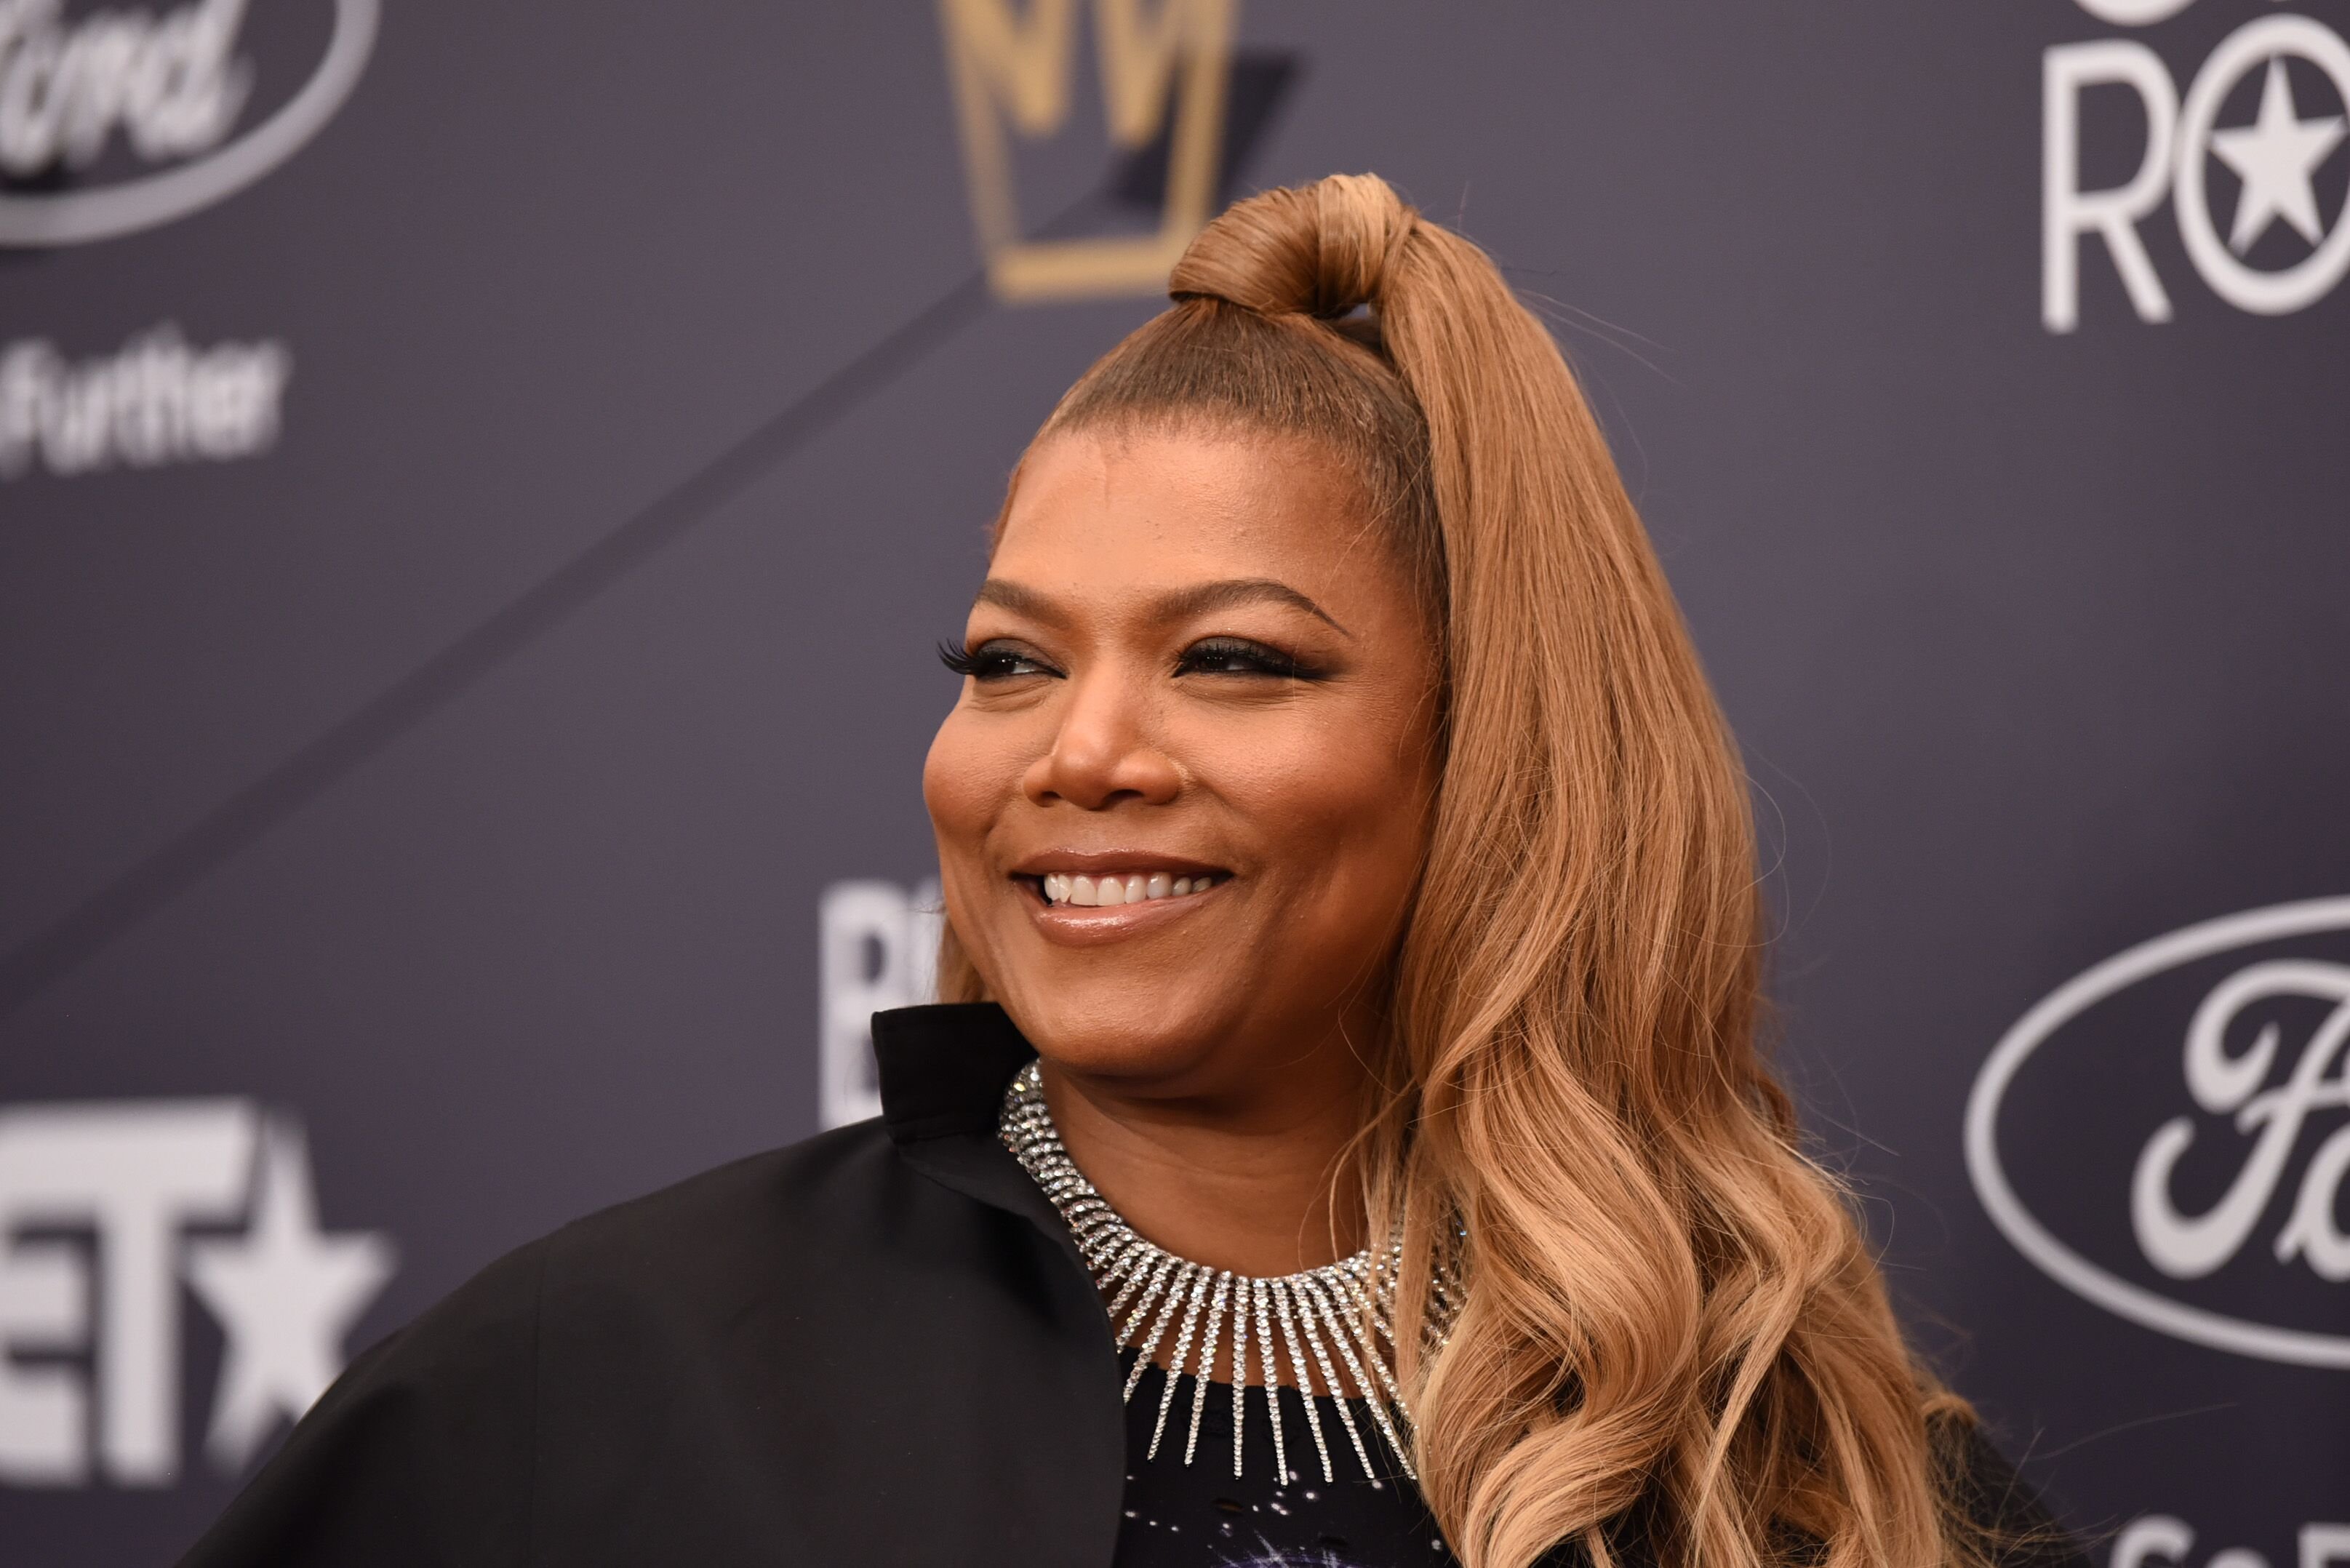 Queen Latifah at the Black Girls Rock! 2018 Red Carpet. | Source: Getty Images